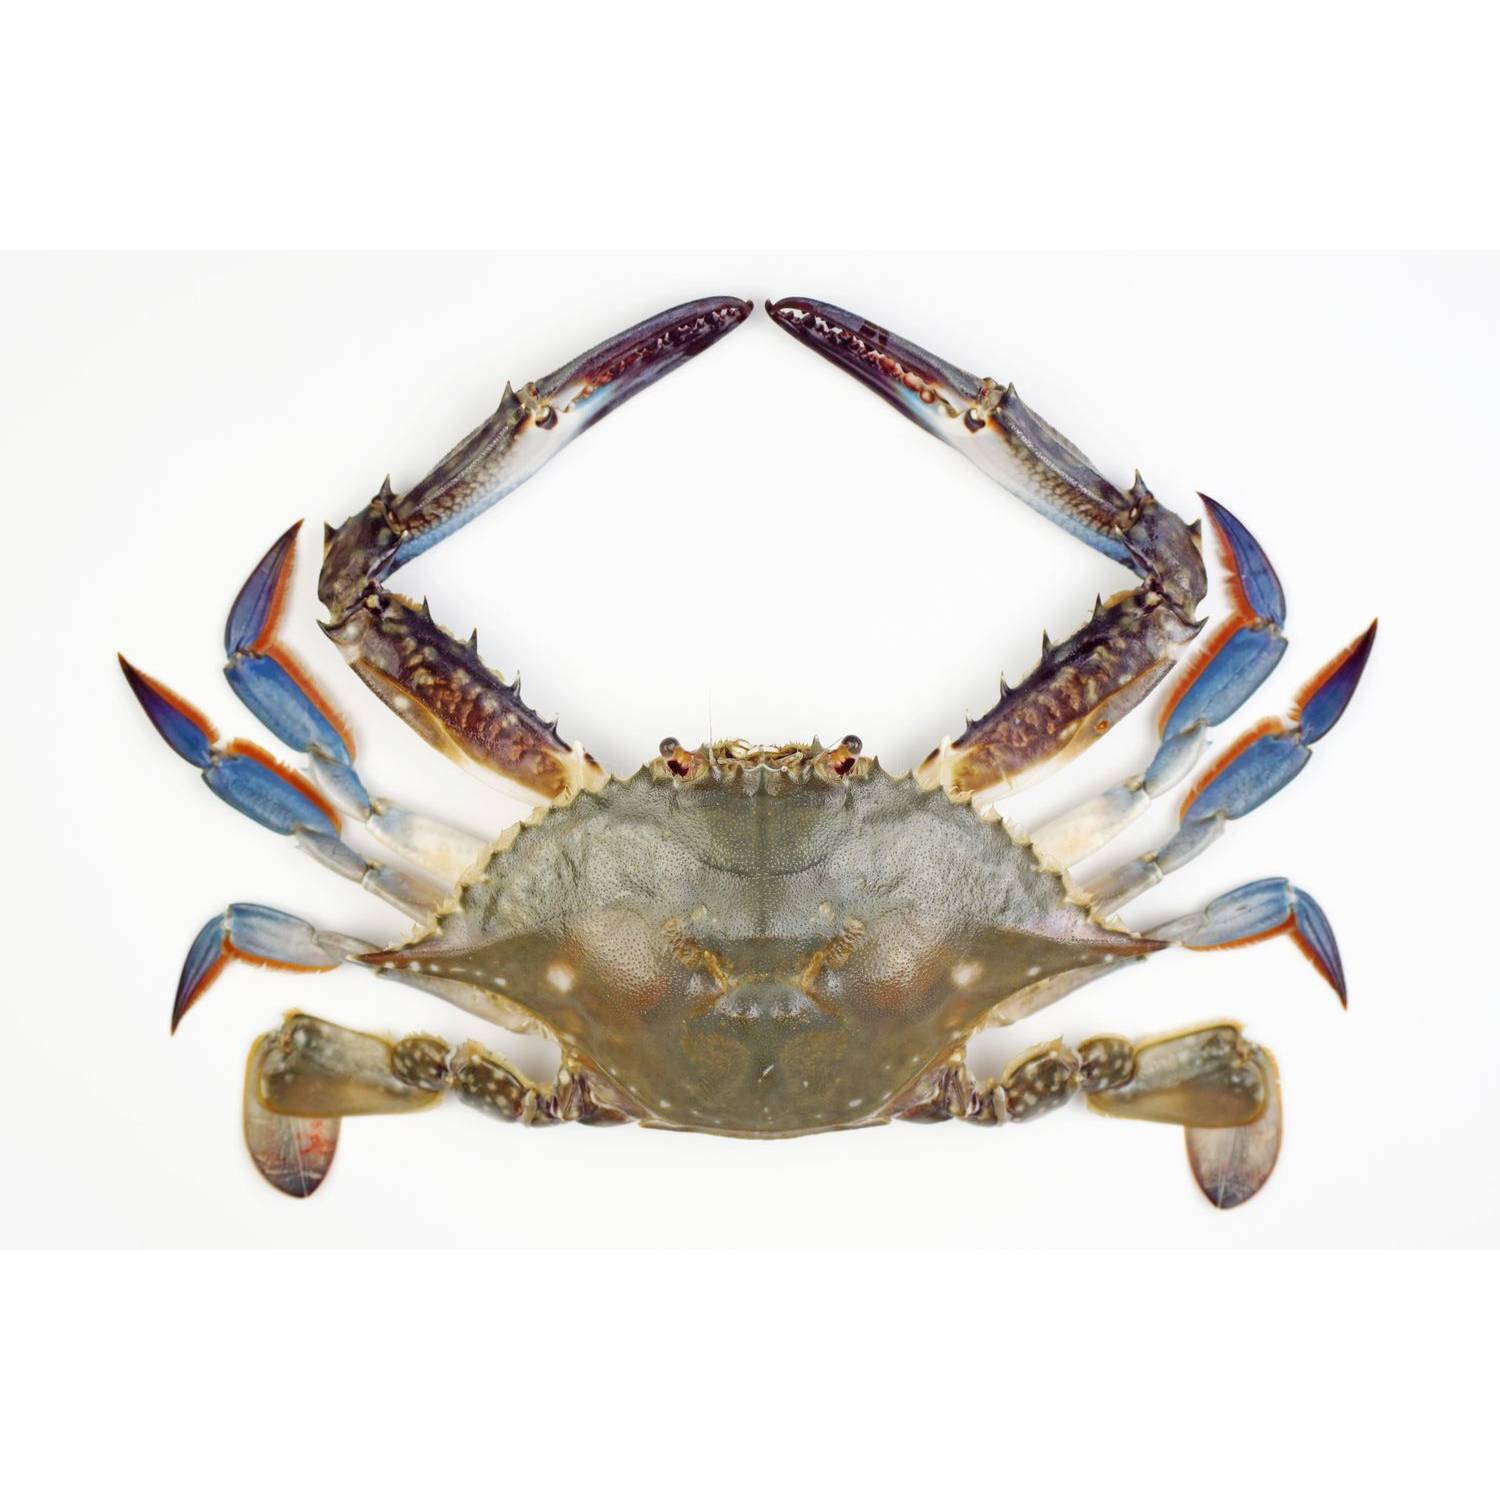 Blue Crab - Whole, Cleaned